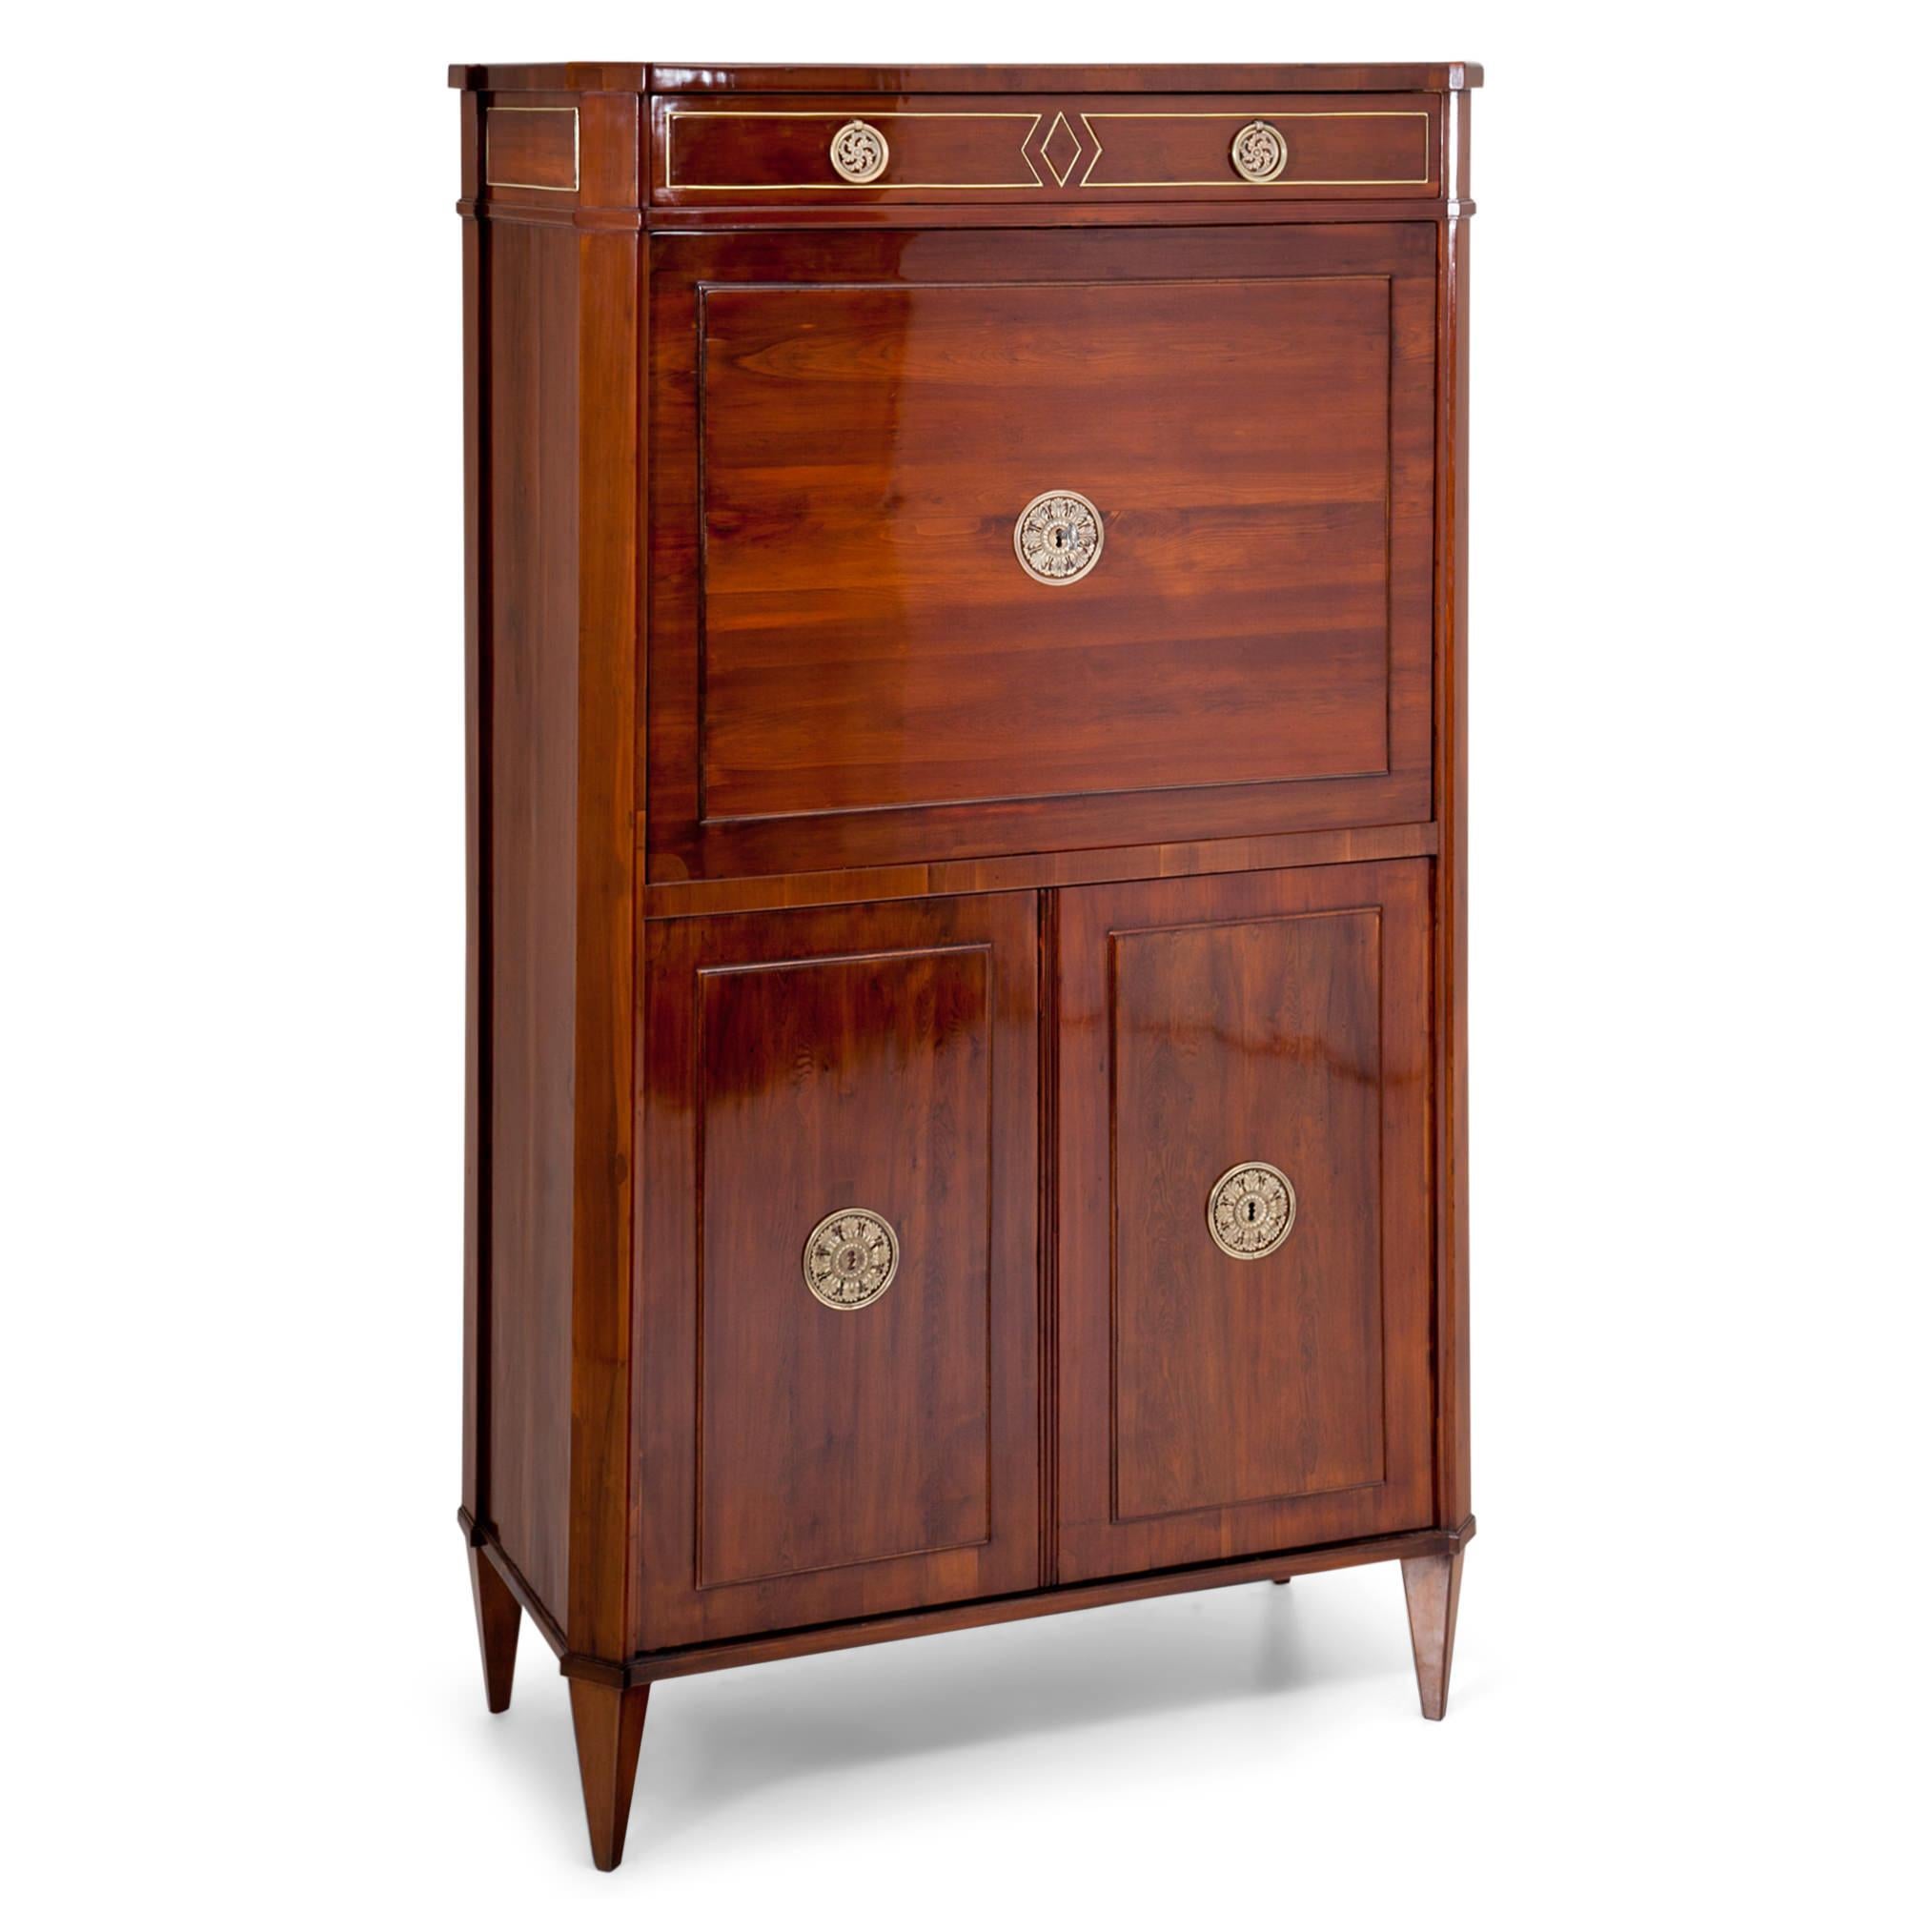 Viennese Empire secretaire out of yew-tree, with one top drawer and a two-doored base, standing on tapered feet. The body has slanted corners and fillings on the doors and writing surface. The secretaire is decorated with brass molding and rosettes.